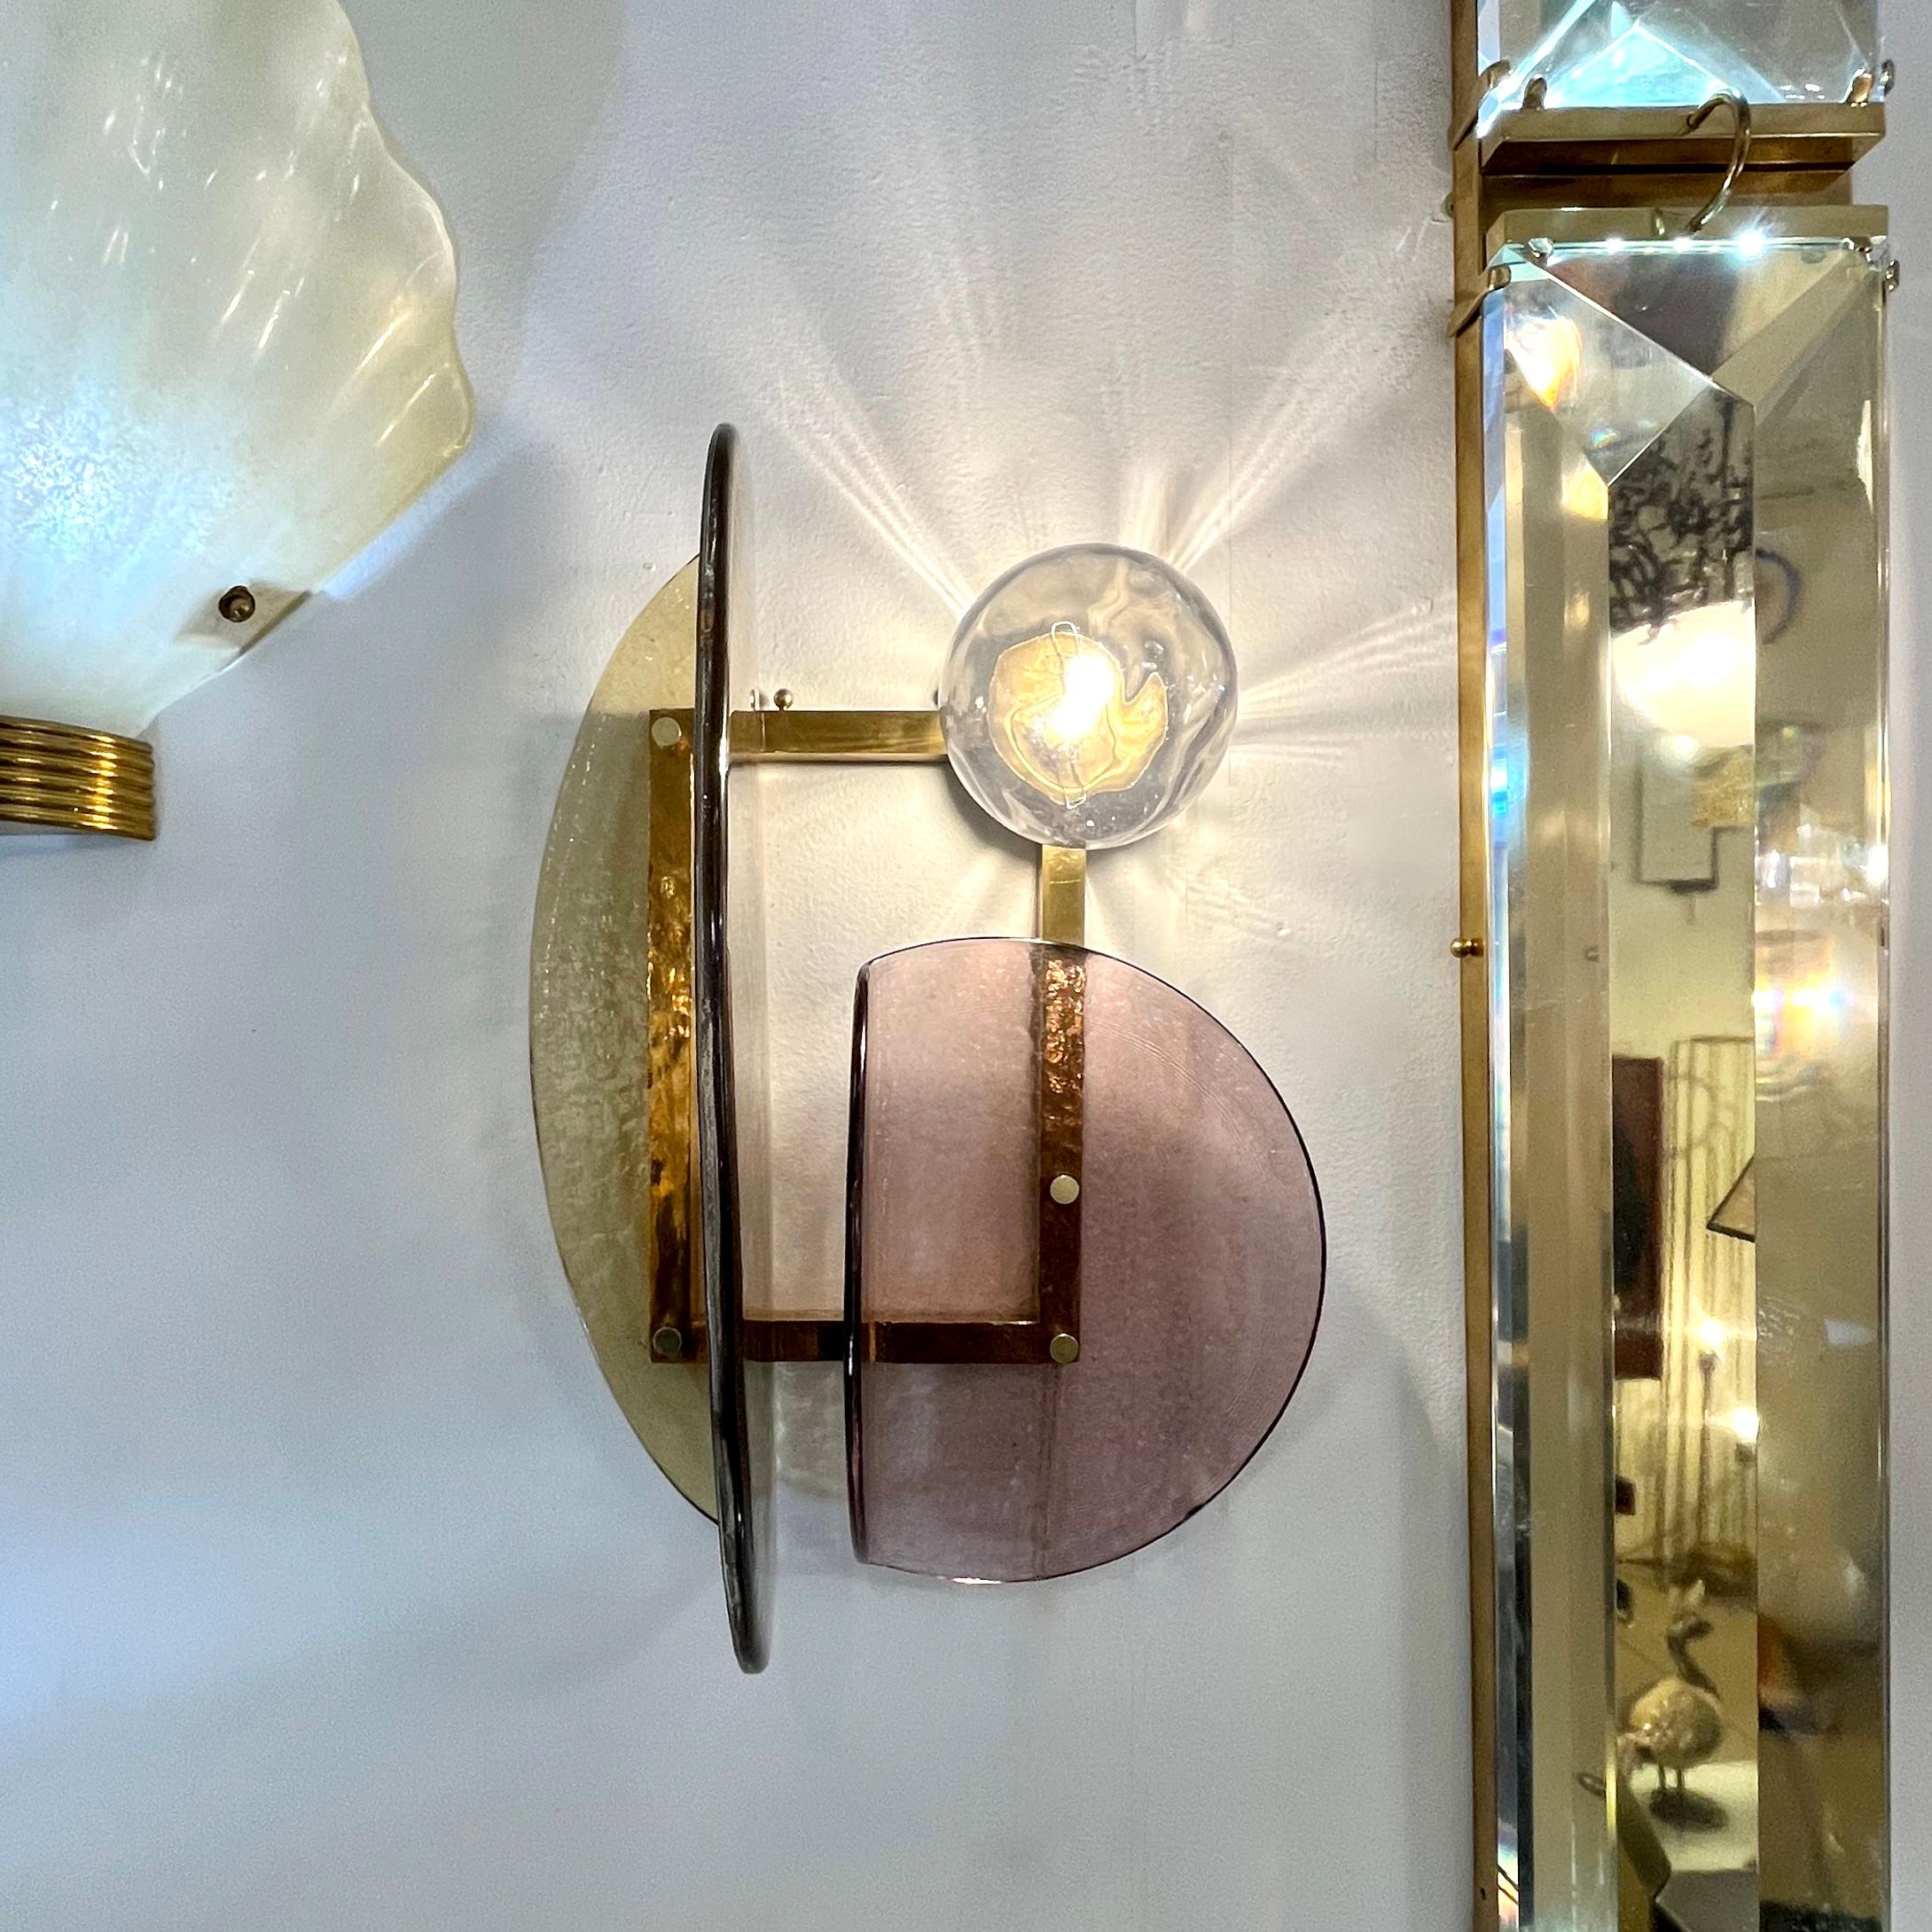 A contemporary creation with a unique modern geometric design, this wall light is entirely handcrafted in Italy. The molded textured glass elements of organic rounded shape, in amber gold and pastel crimson Murano glass, are mounted in a geometric